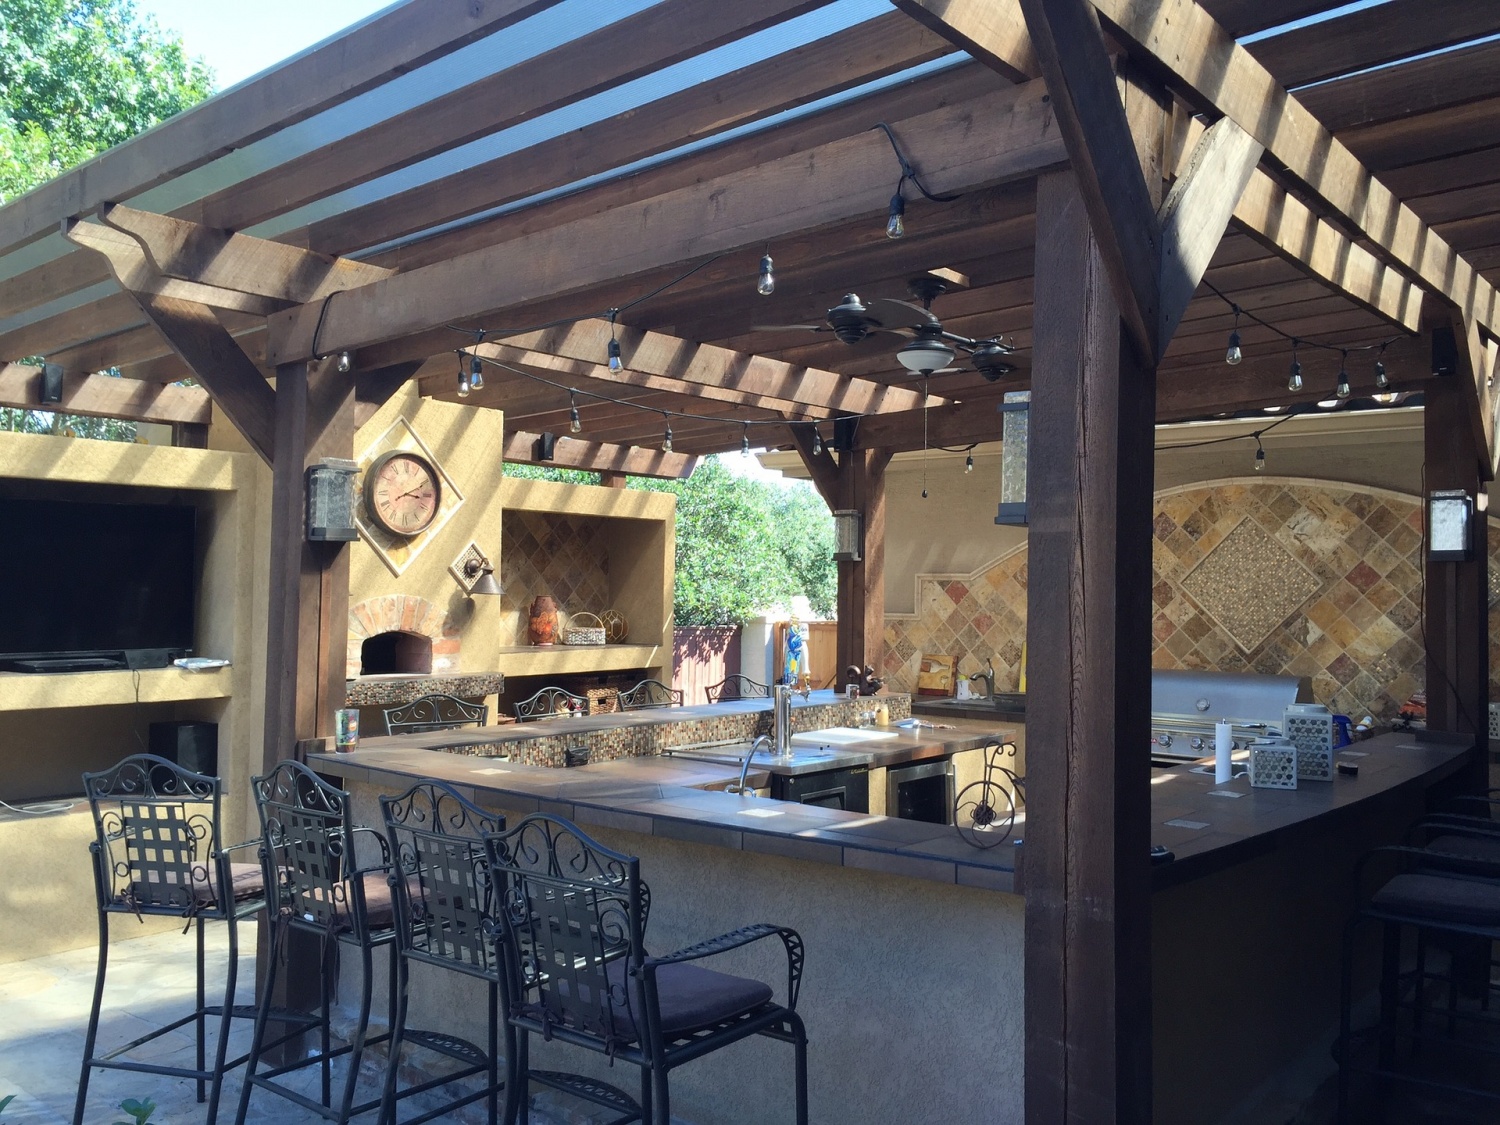 The Health and Wellness Benefits of an Outdoor Kitchen